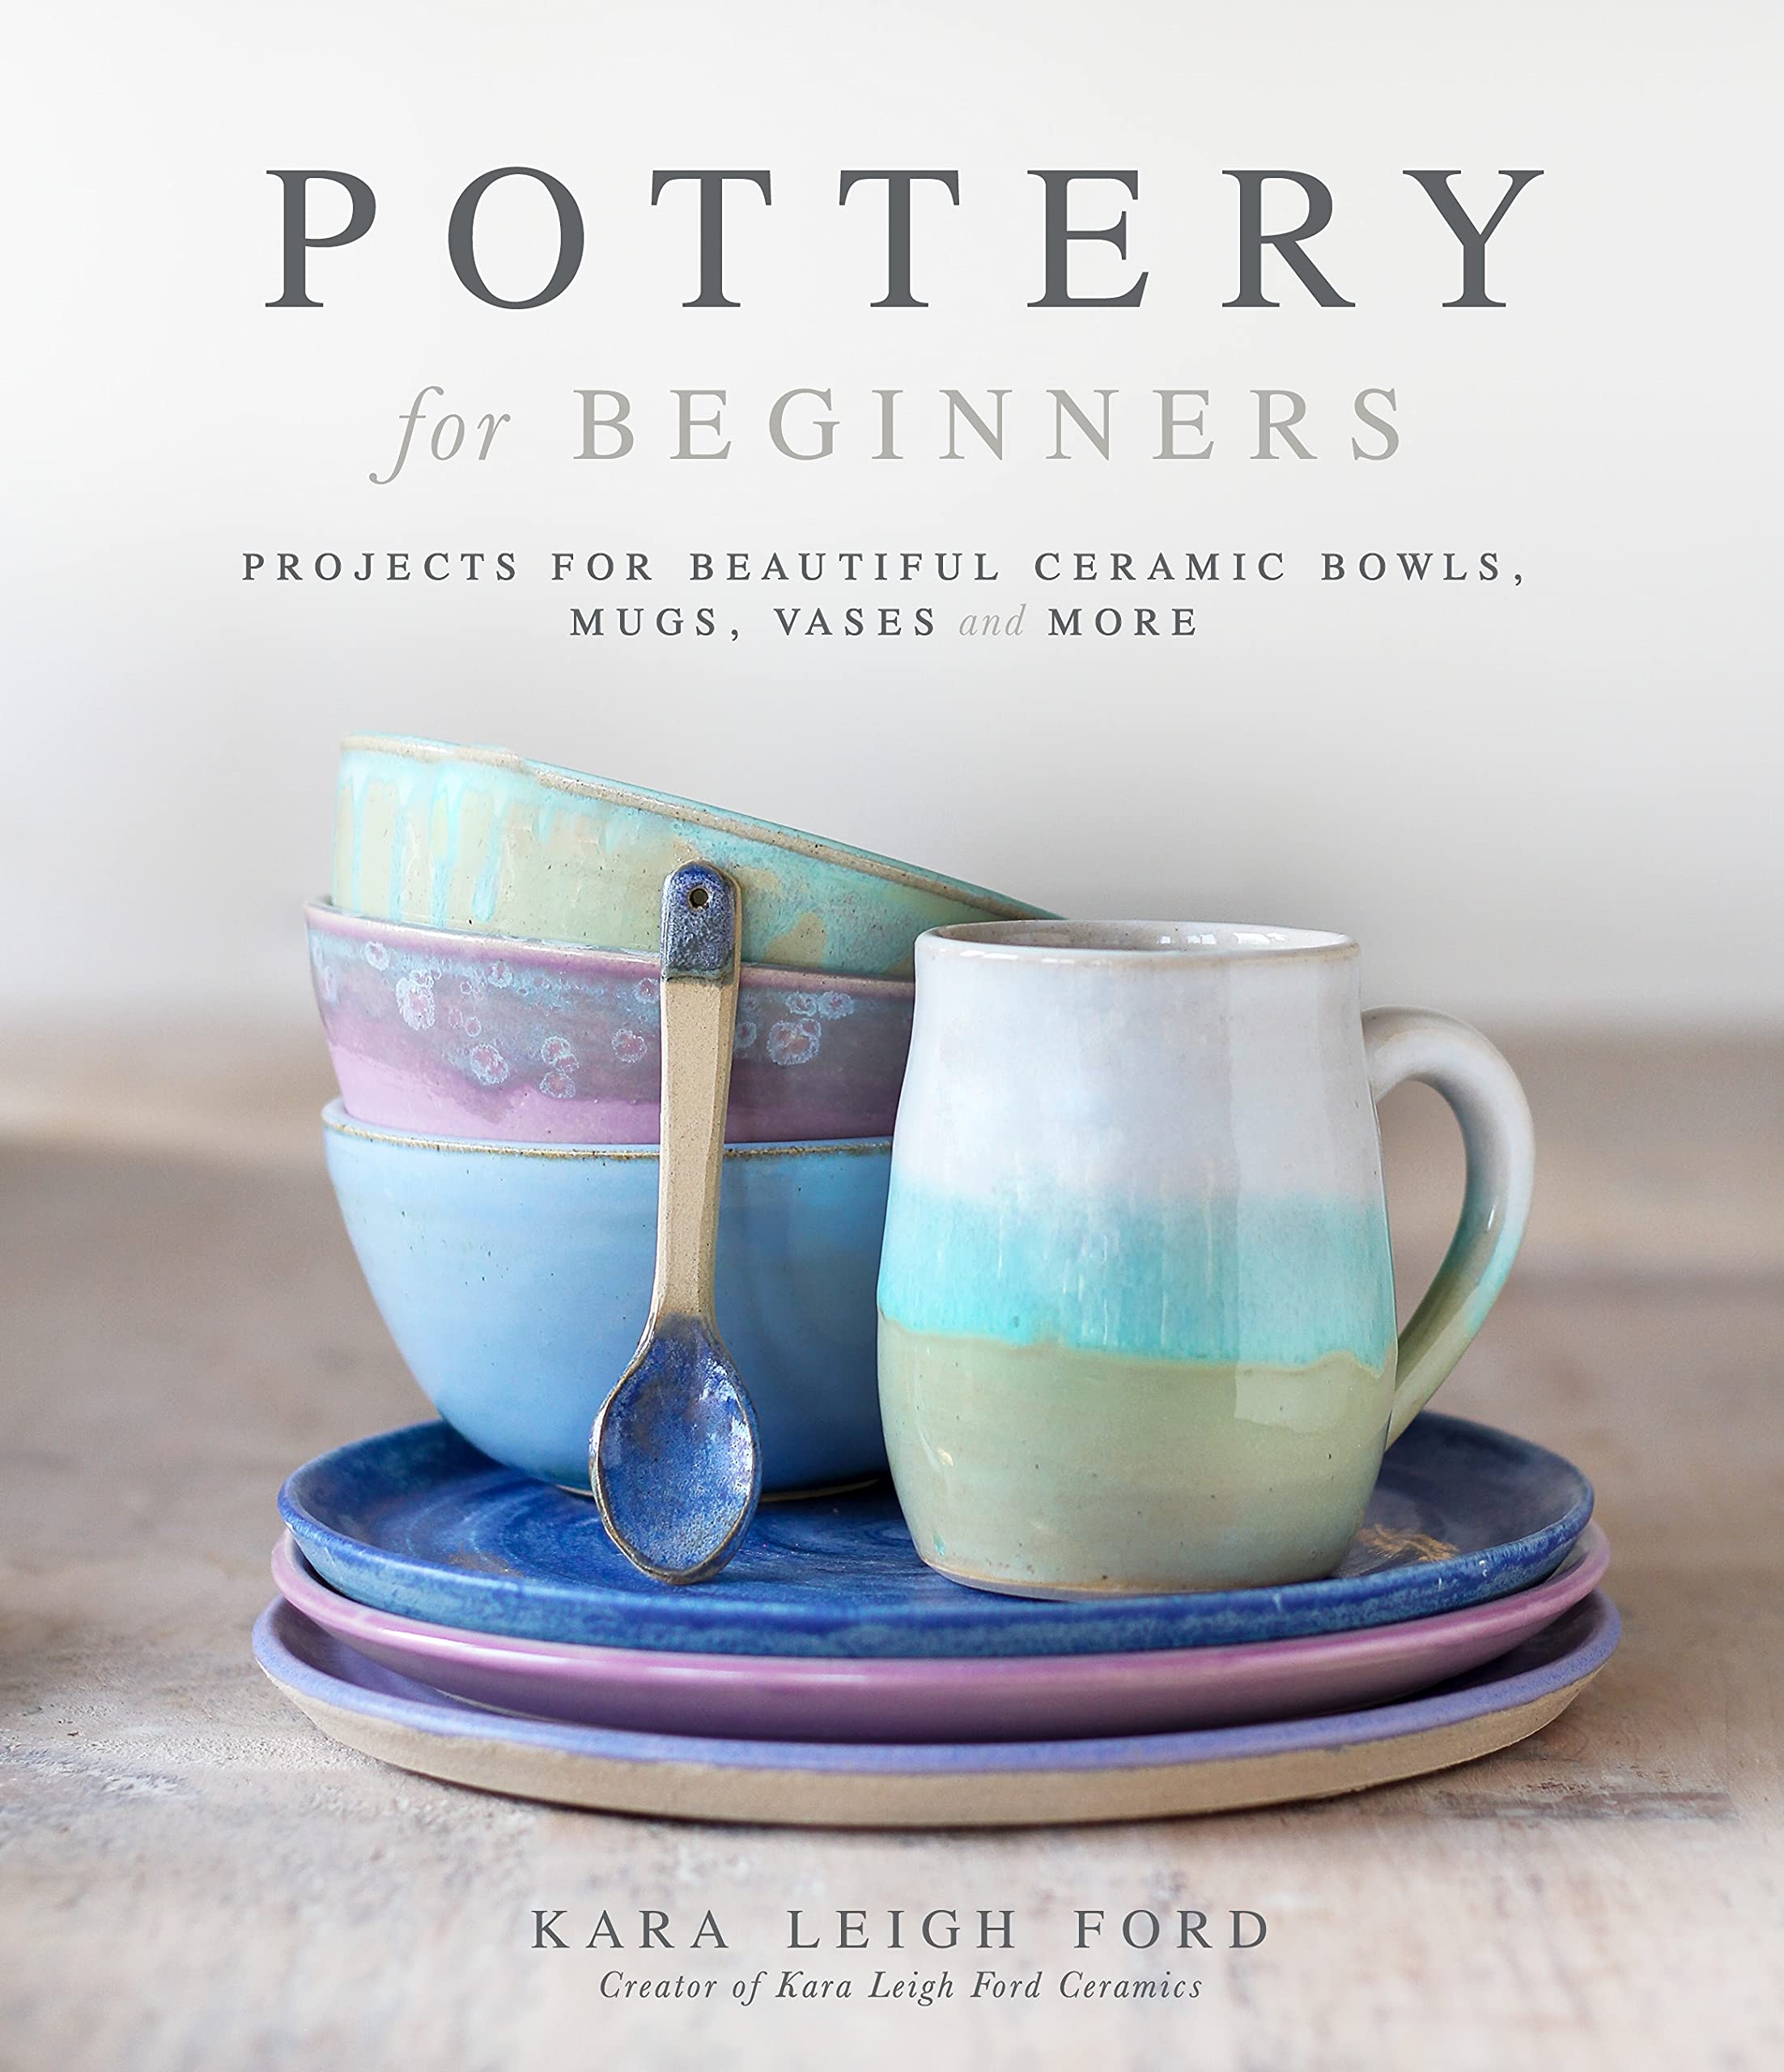 Image for "Pottery for Beginners"